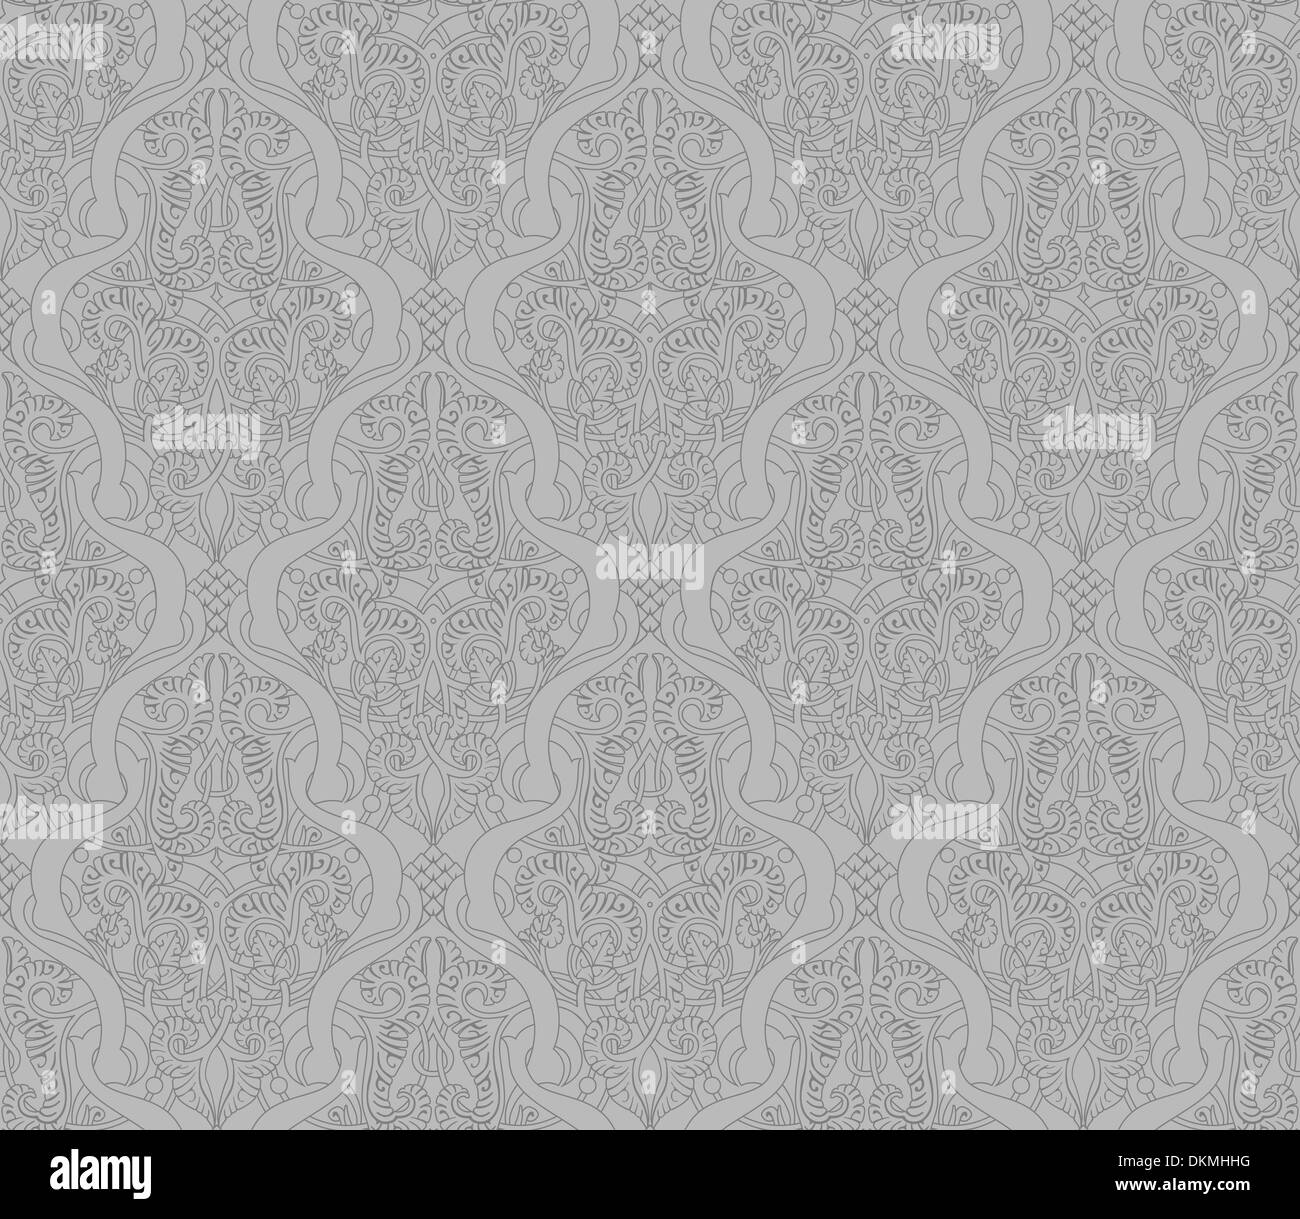 Vintage intricate seamlessly tilable repeating arabic background pattern Stock Photo